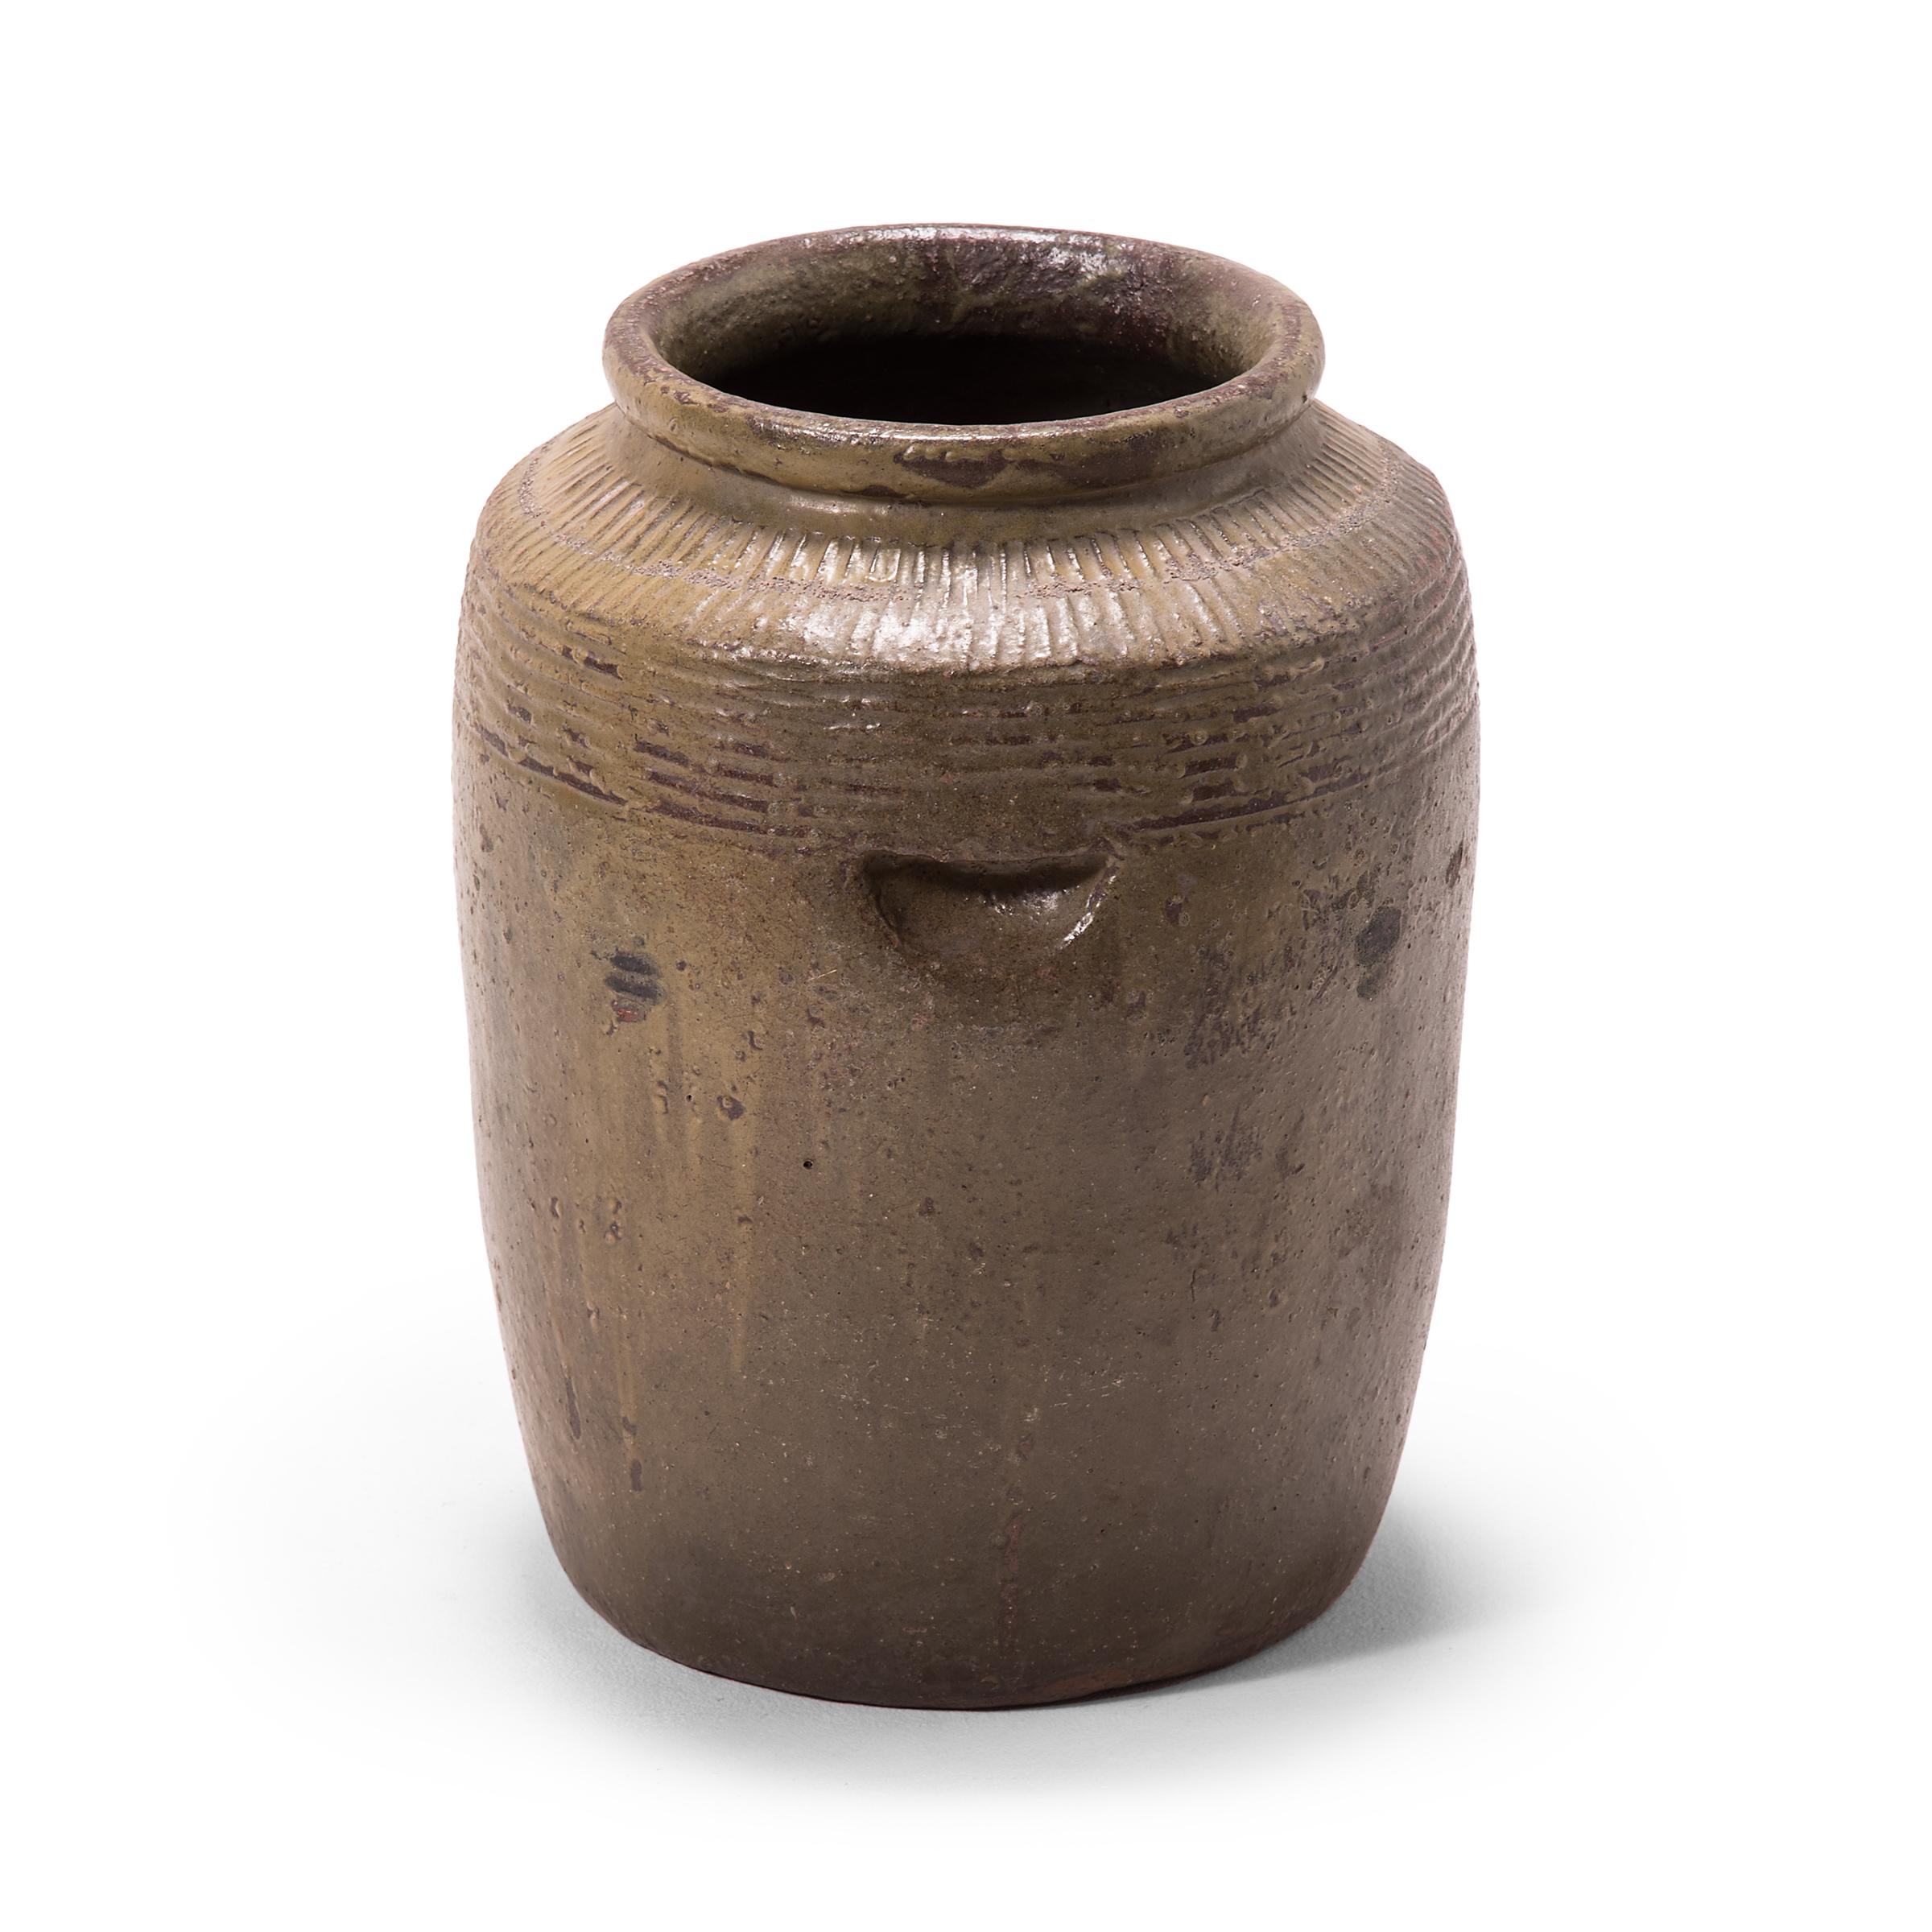 Originally used for pickling foods, this early 20th century ceramic jar is coated inside and out with a warm grey glaze. Decorative ridges patterning the jar's high shoulders manipulate the glaze to pool irregularly across the surface. The jar is